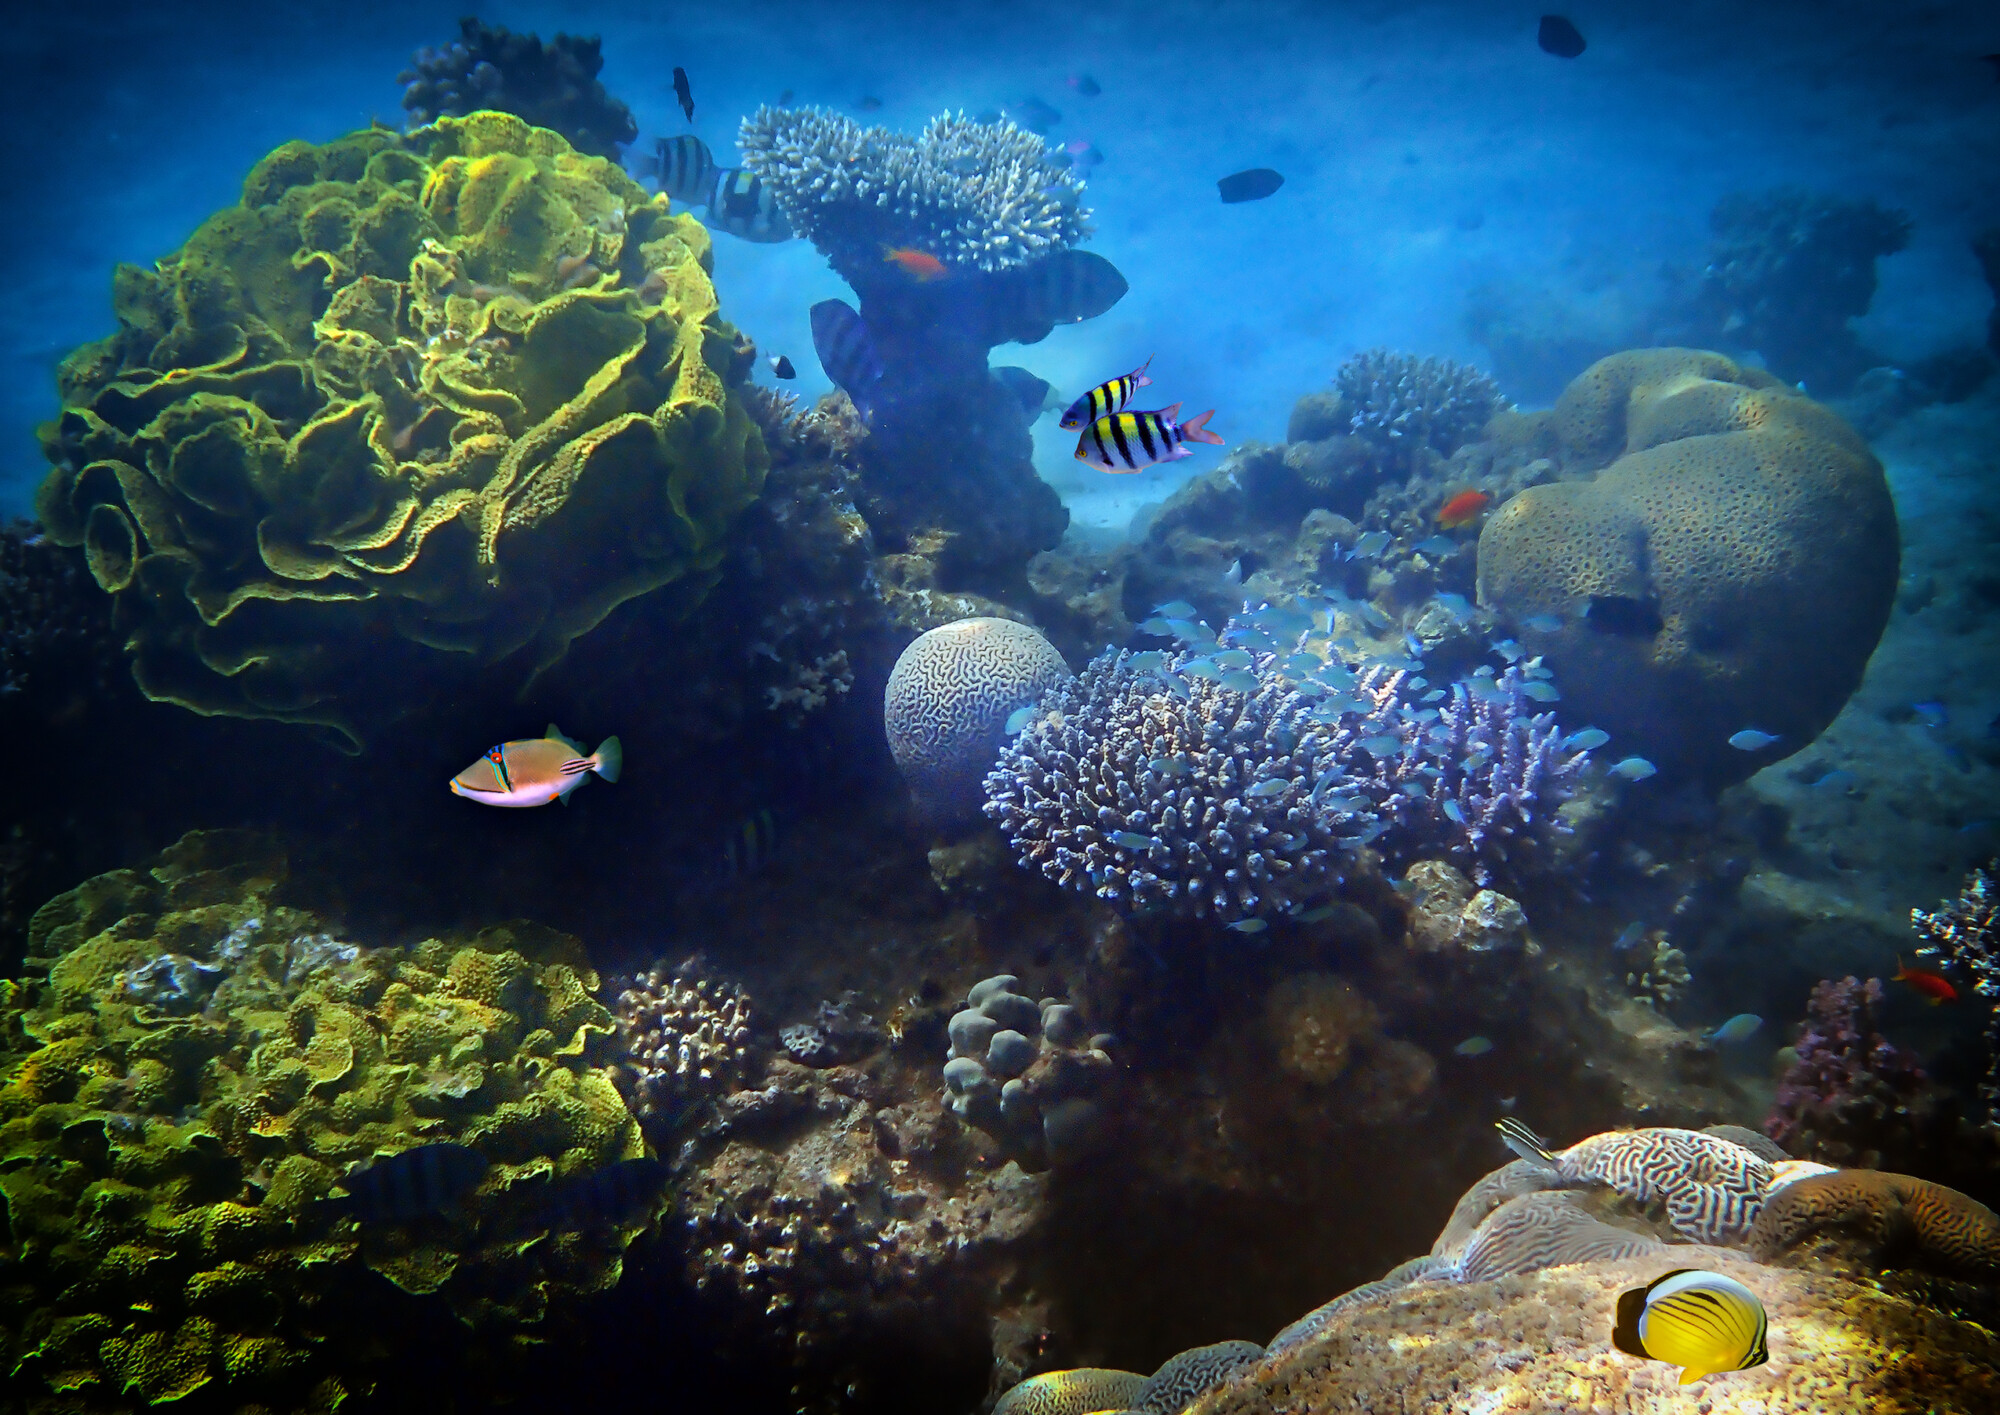 Image depicts biodiversity of coral reef at the Red Sea